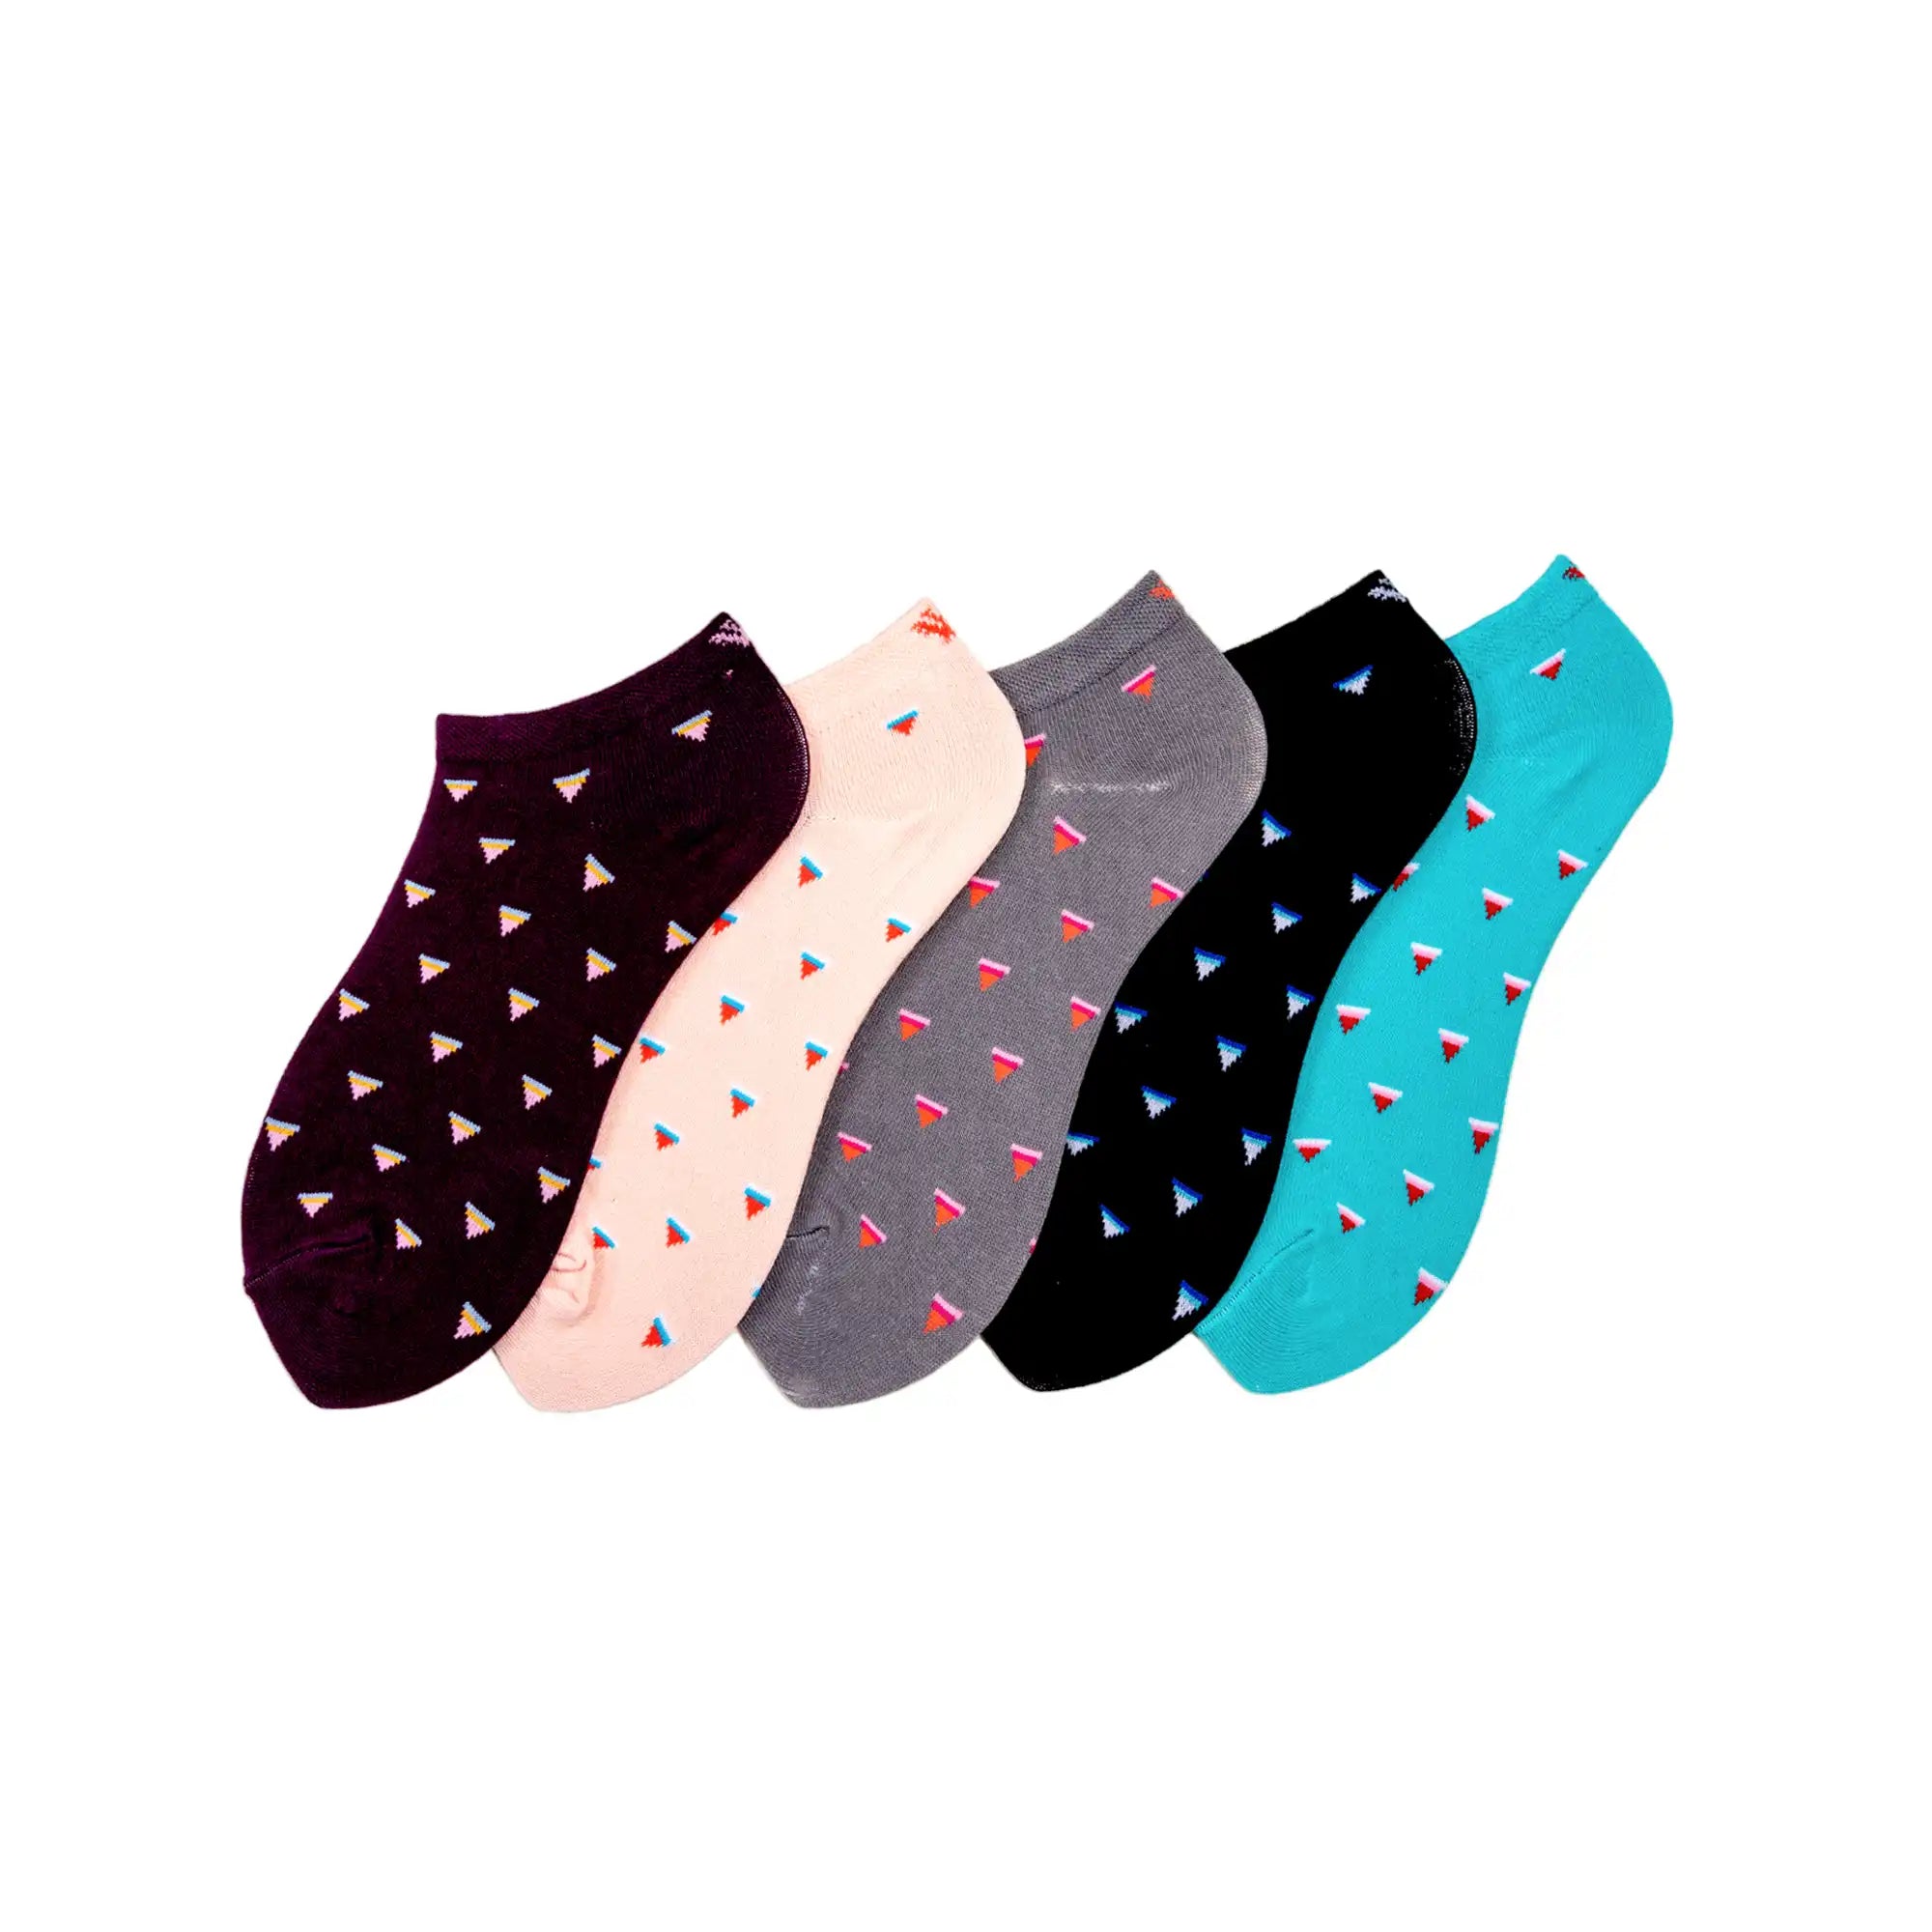 Young Wings Women's Multi Colour Cotton Fabric Design Low Ankle Length Socks - Pack of 5, Style no. 6107-W1